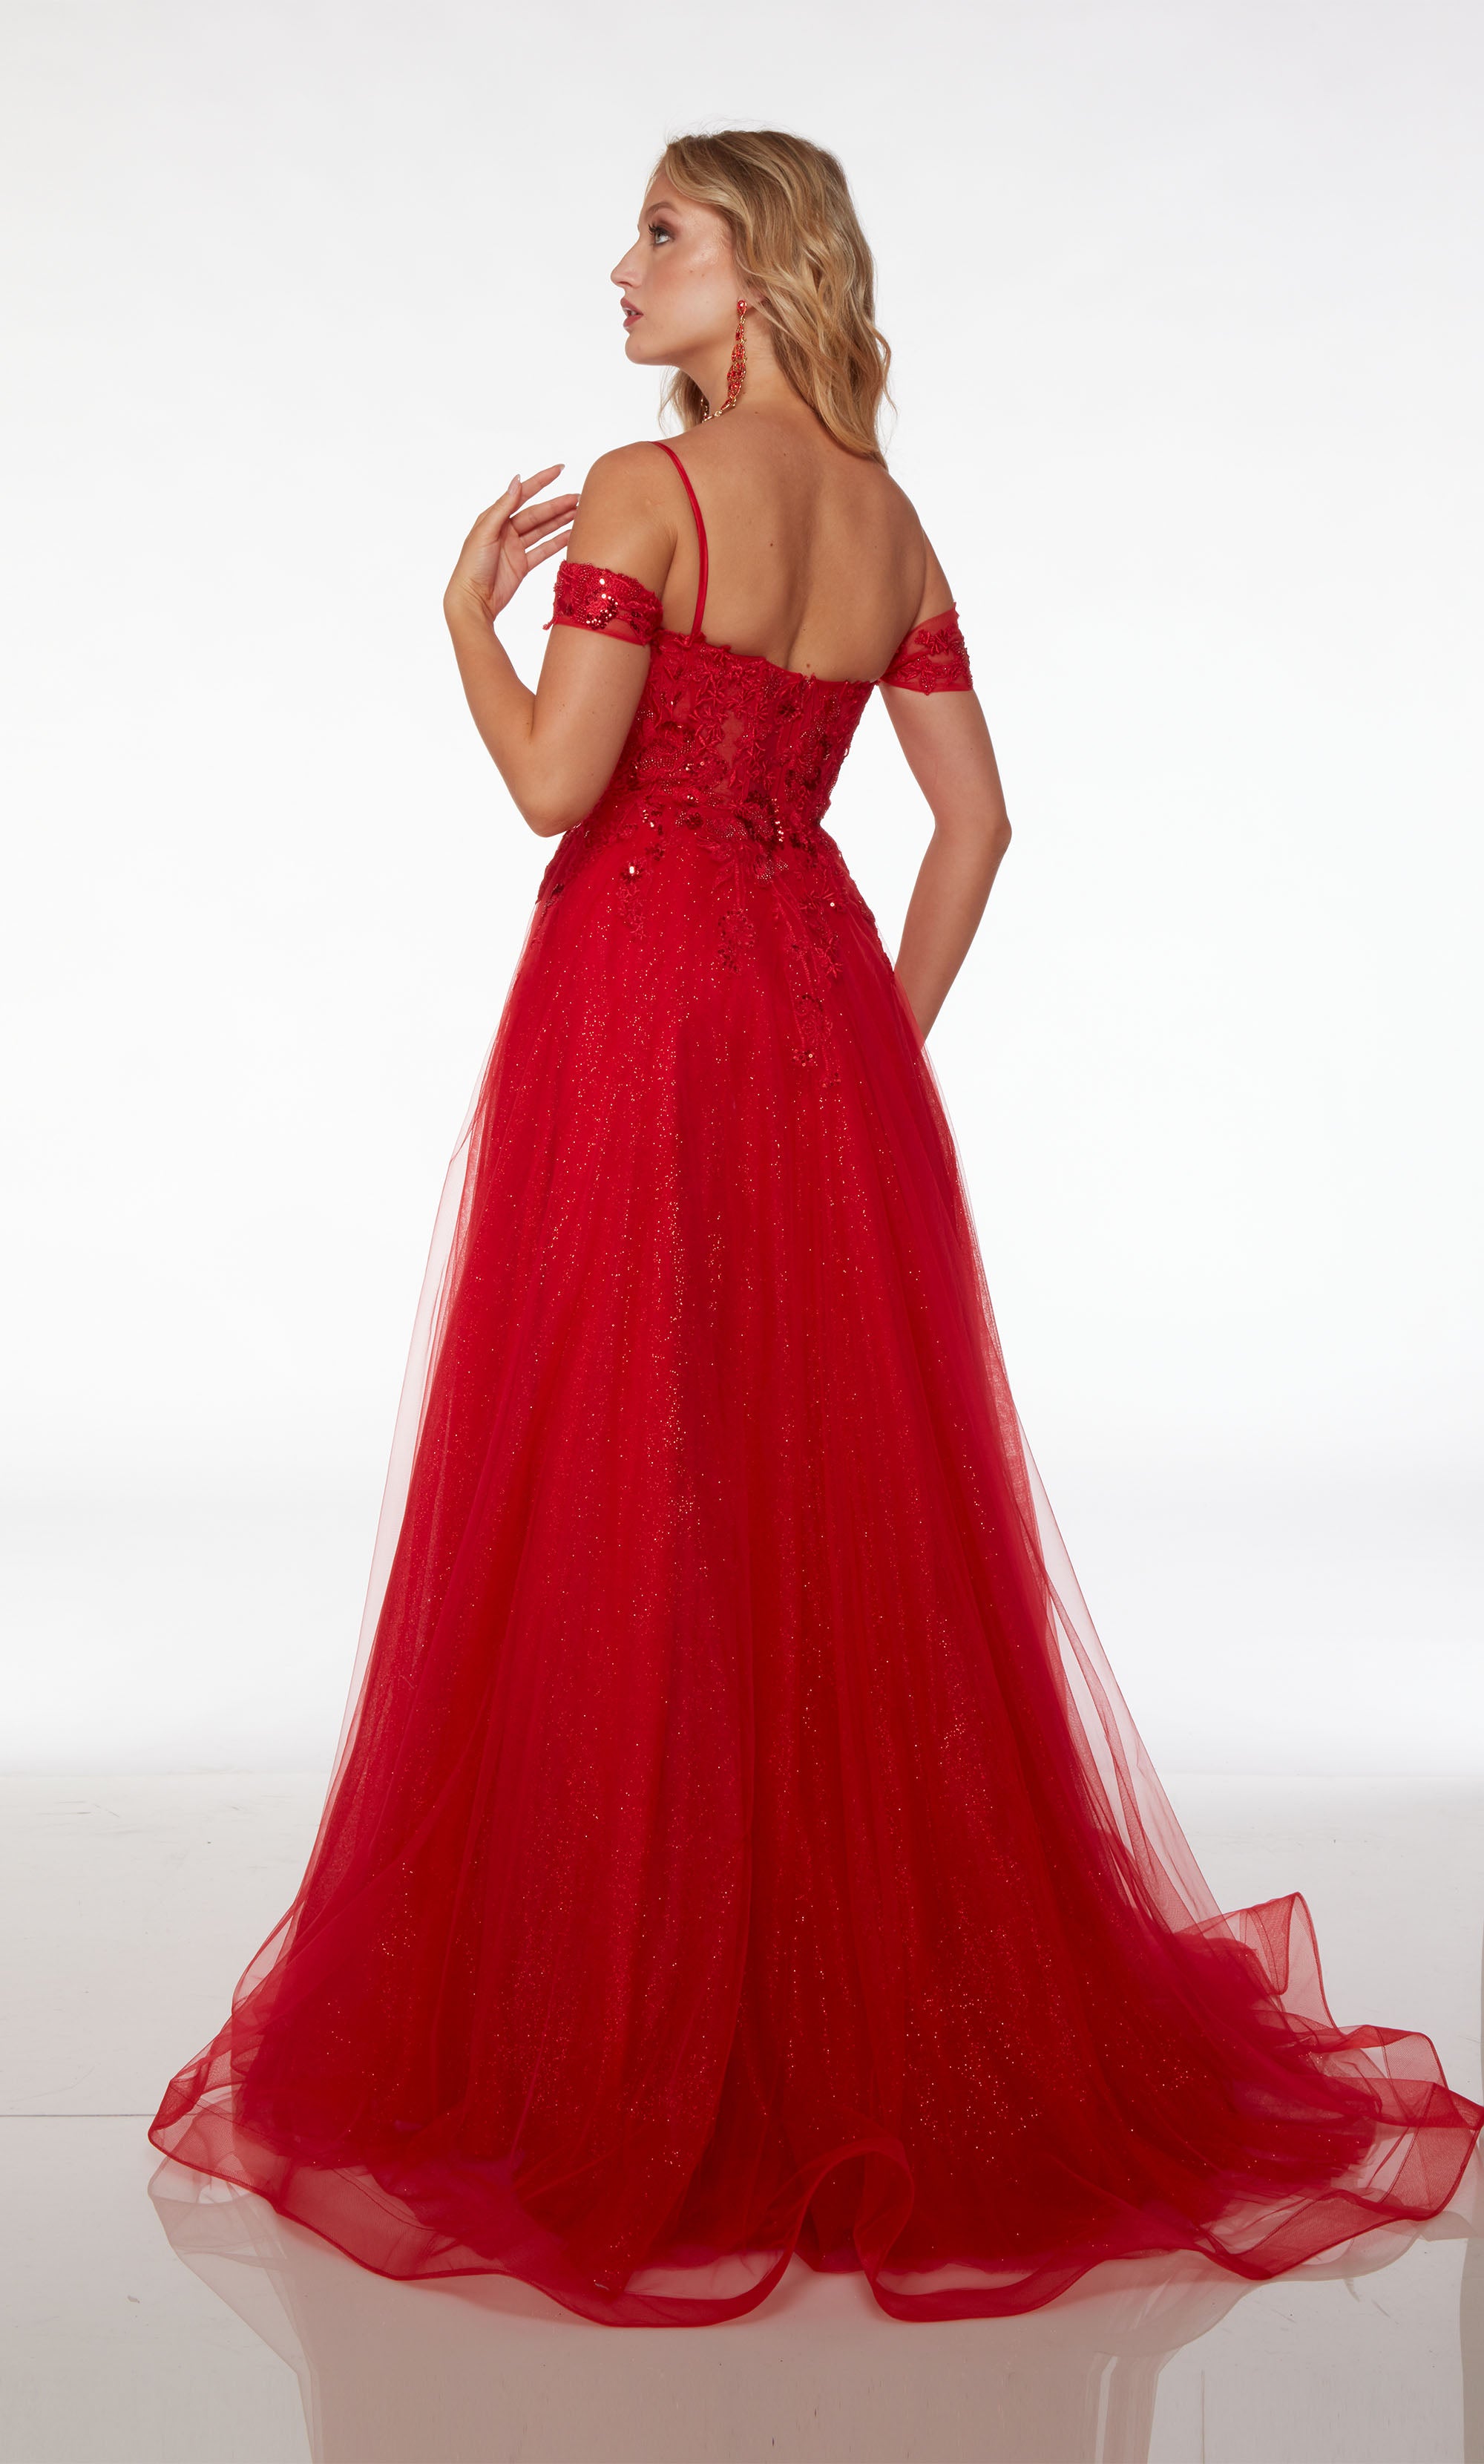 Red prom dress: Off-the-shoulder neckline, A-line skirt with side slit, romantic train, and delicate beaded lace appliques for an timeless and elegant look.